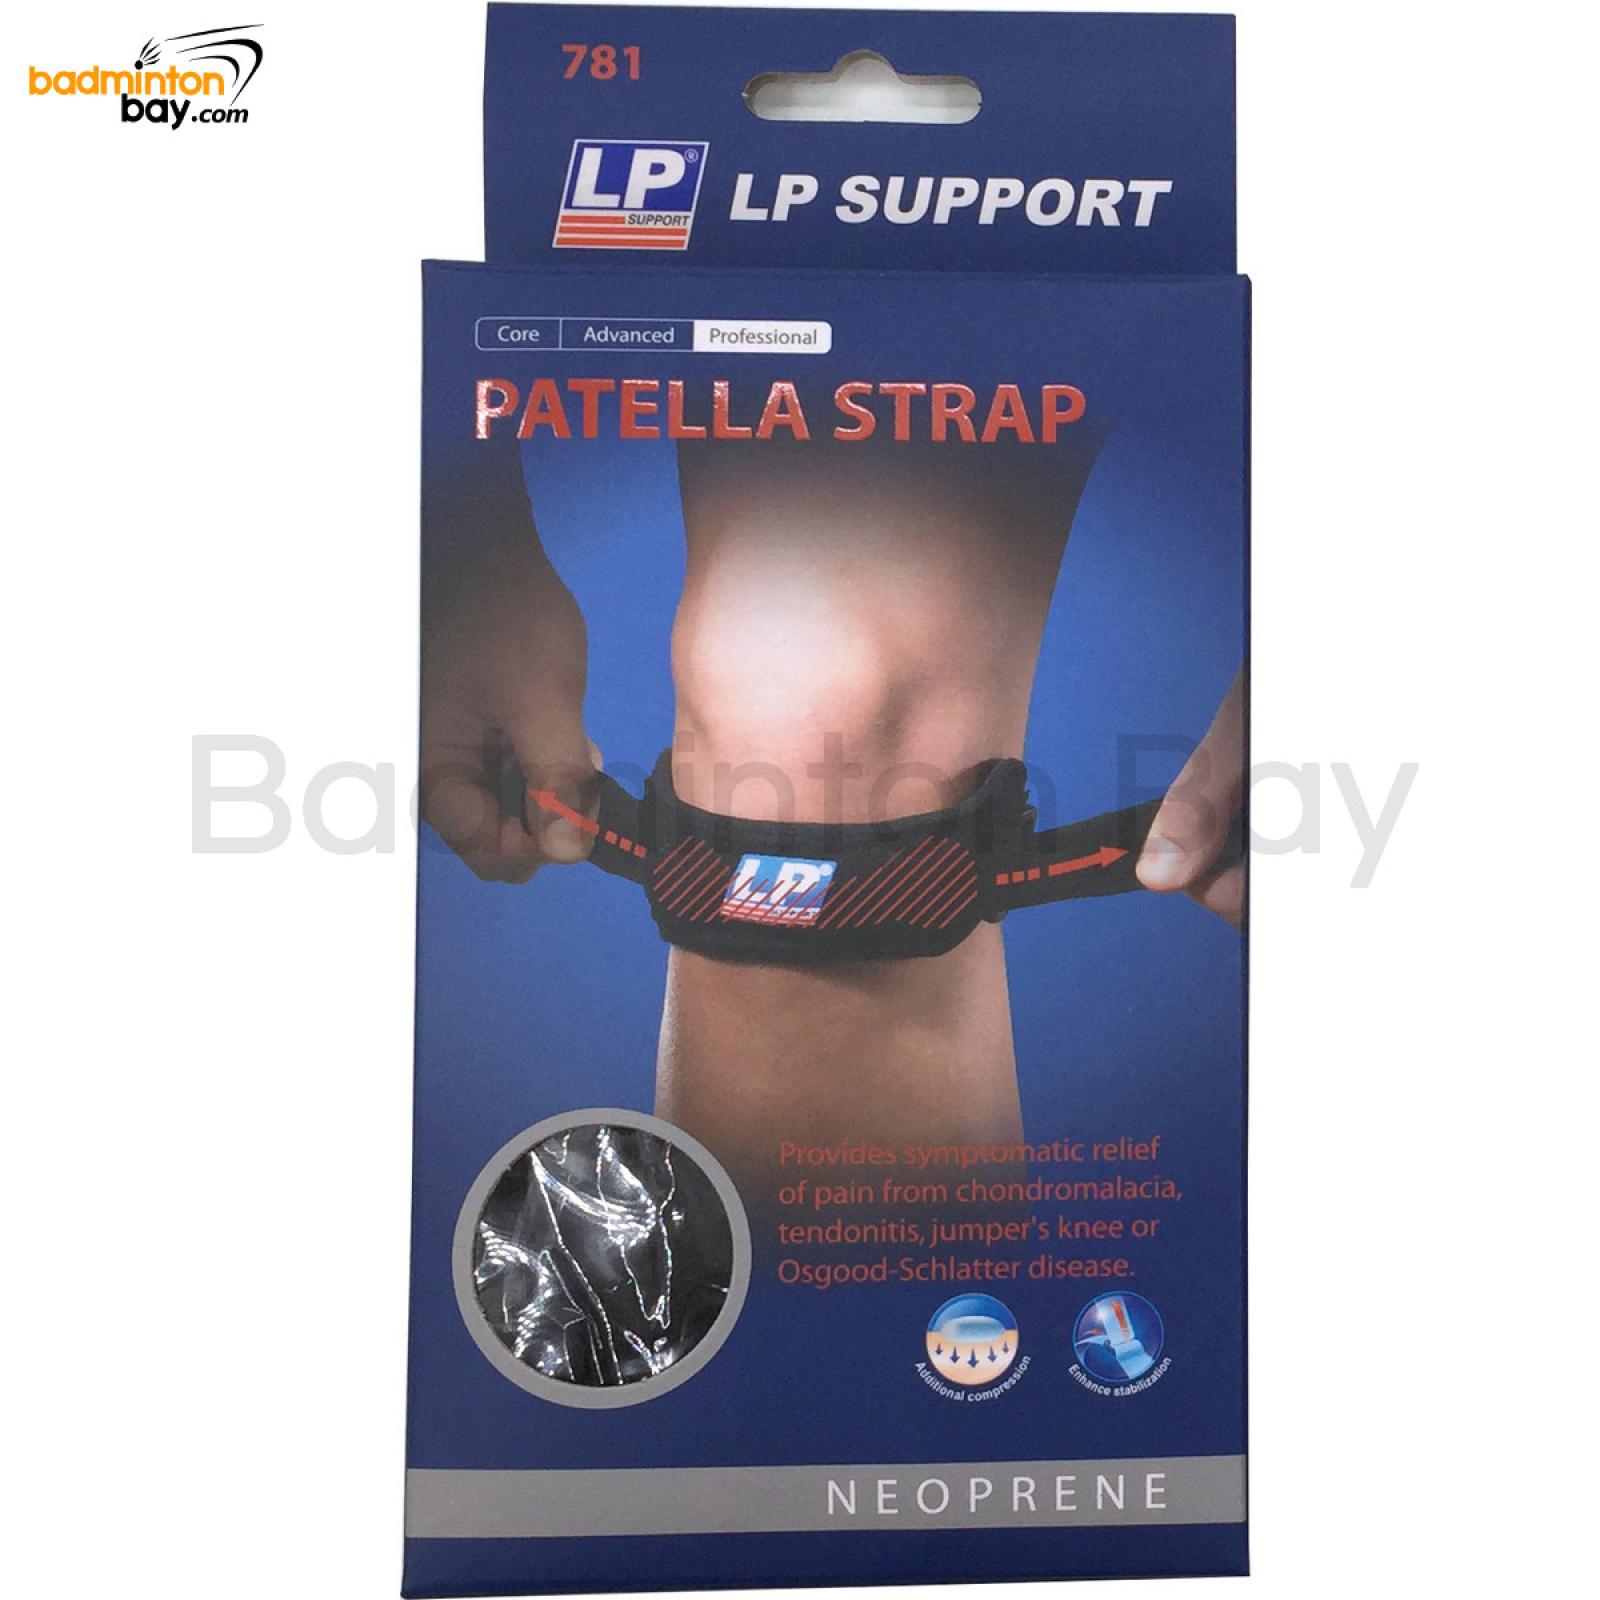 Patellar Band, Levy, Trainer's Choice